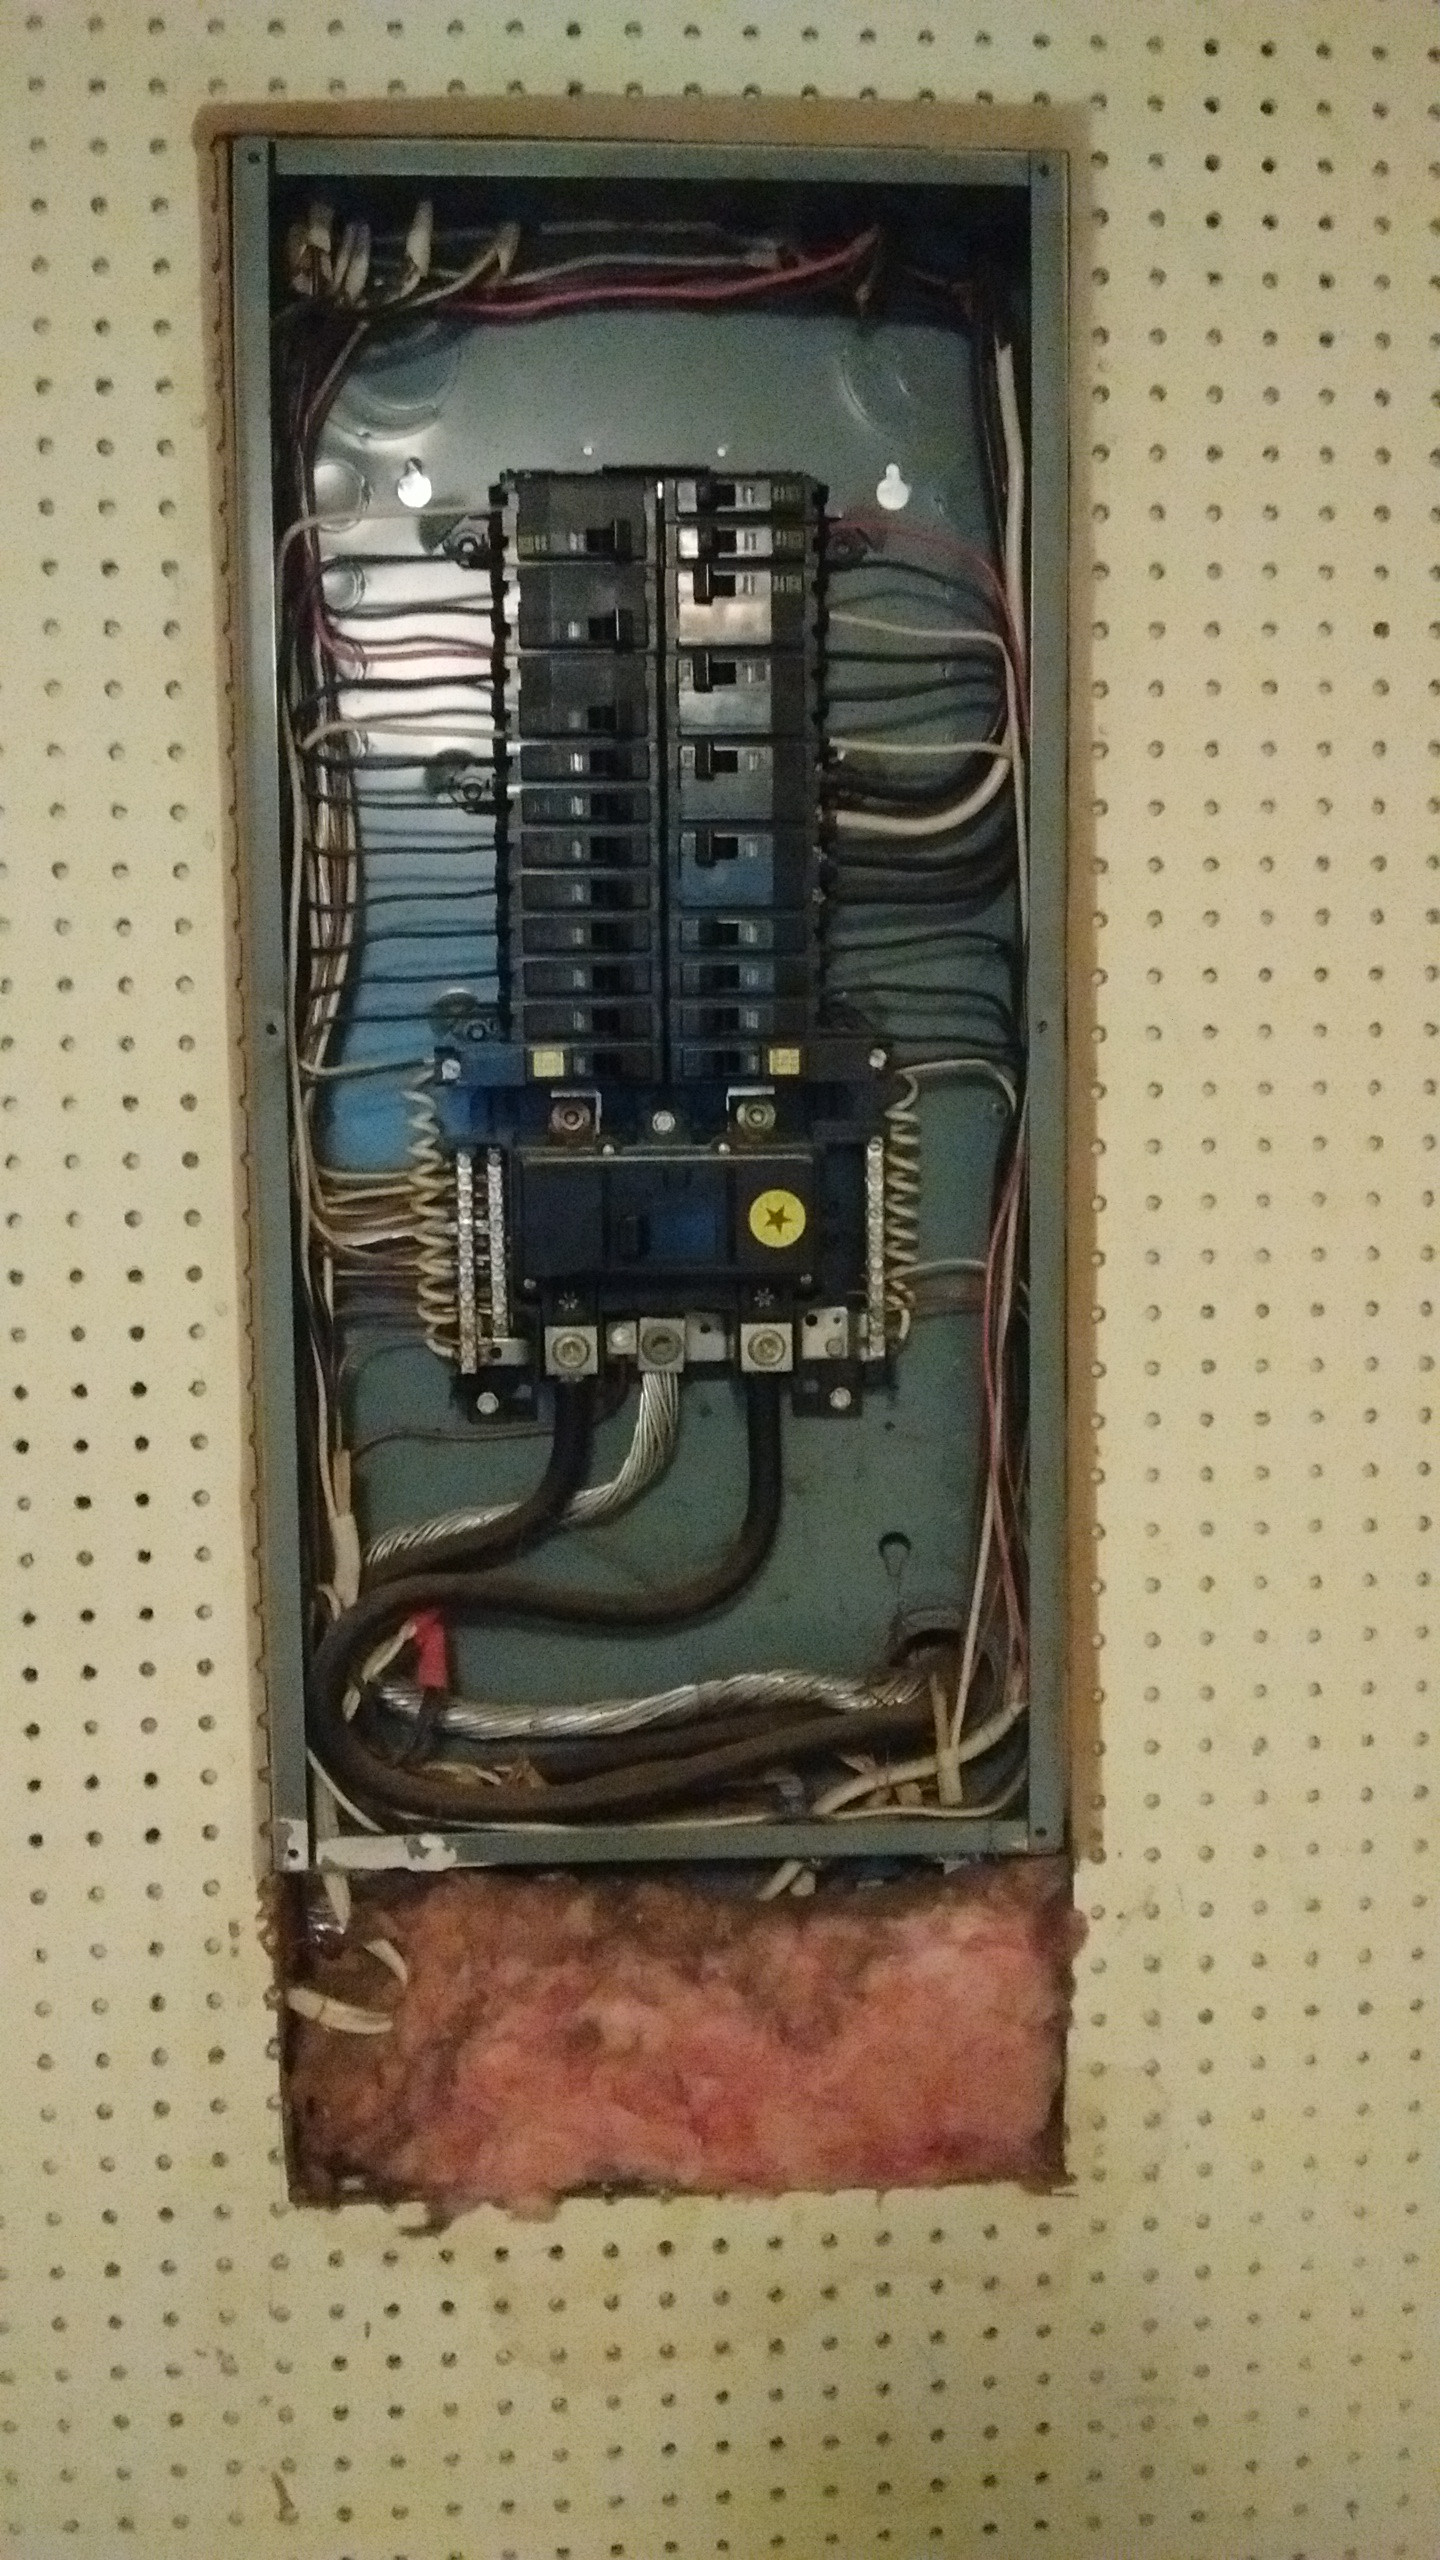 insulation - How to stop cold air entering through the breaker box ...